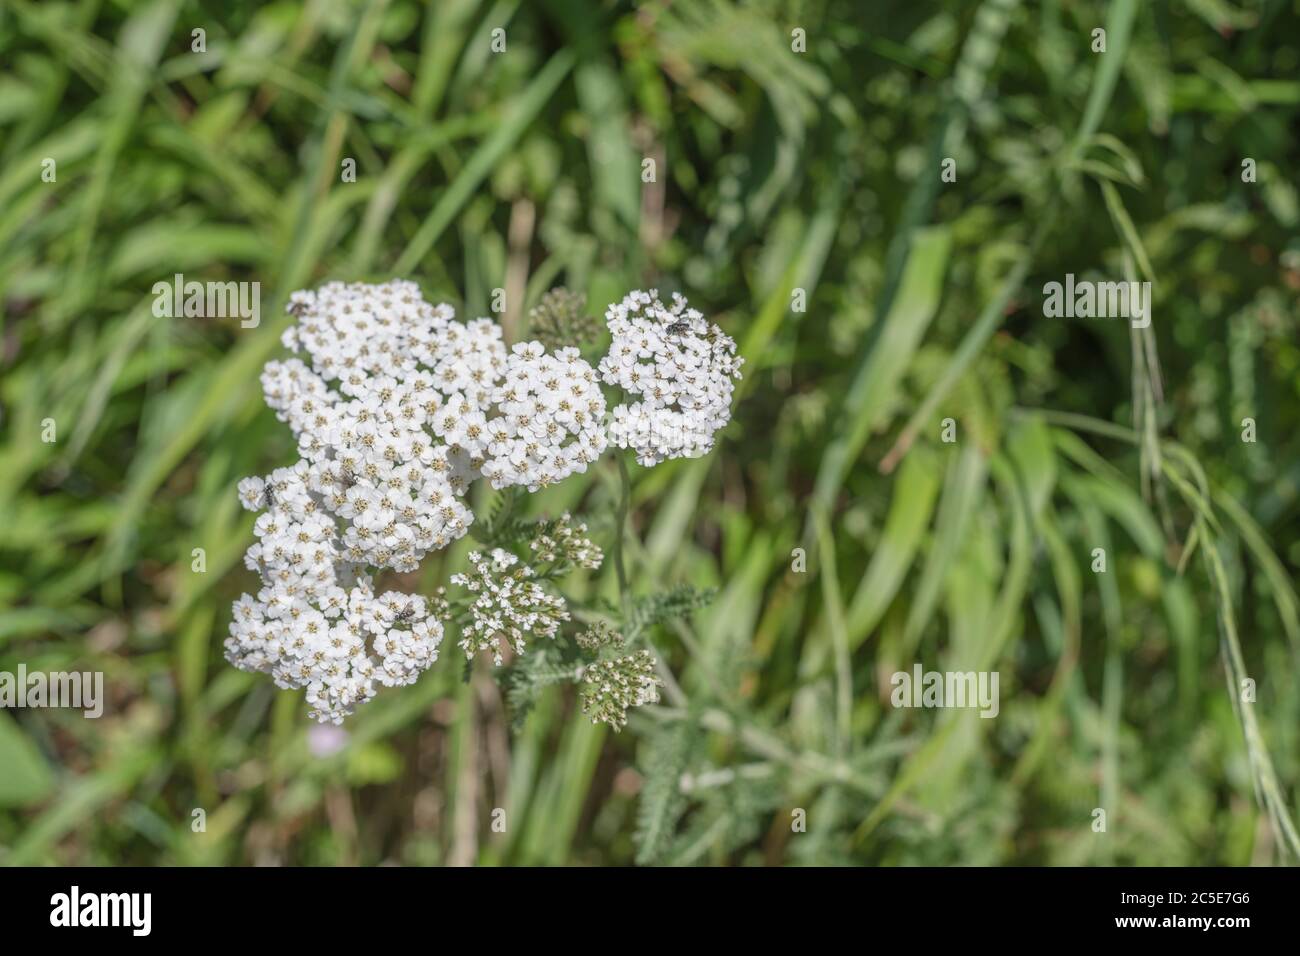 Tuft of white Yarrow / Achillea millefolium flowers in June. Also called Milfoil, the well-known plant was a medicinal plant used in herbal remedies Stock Photo